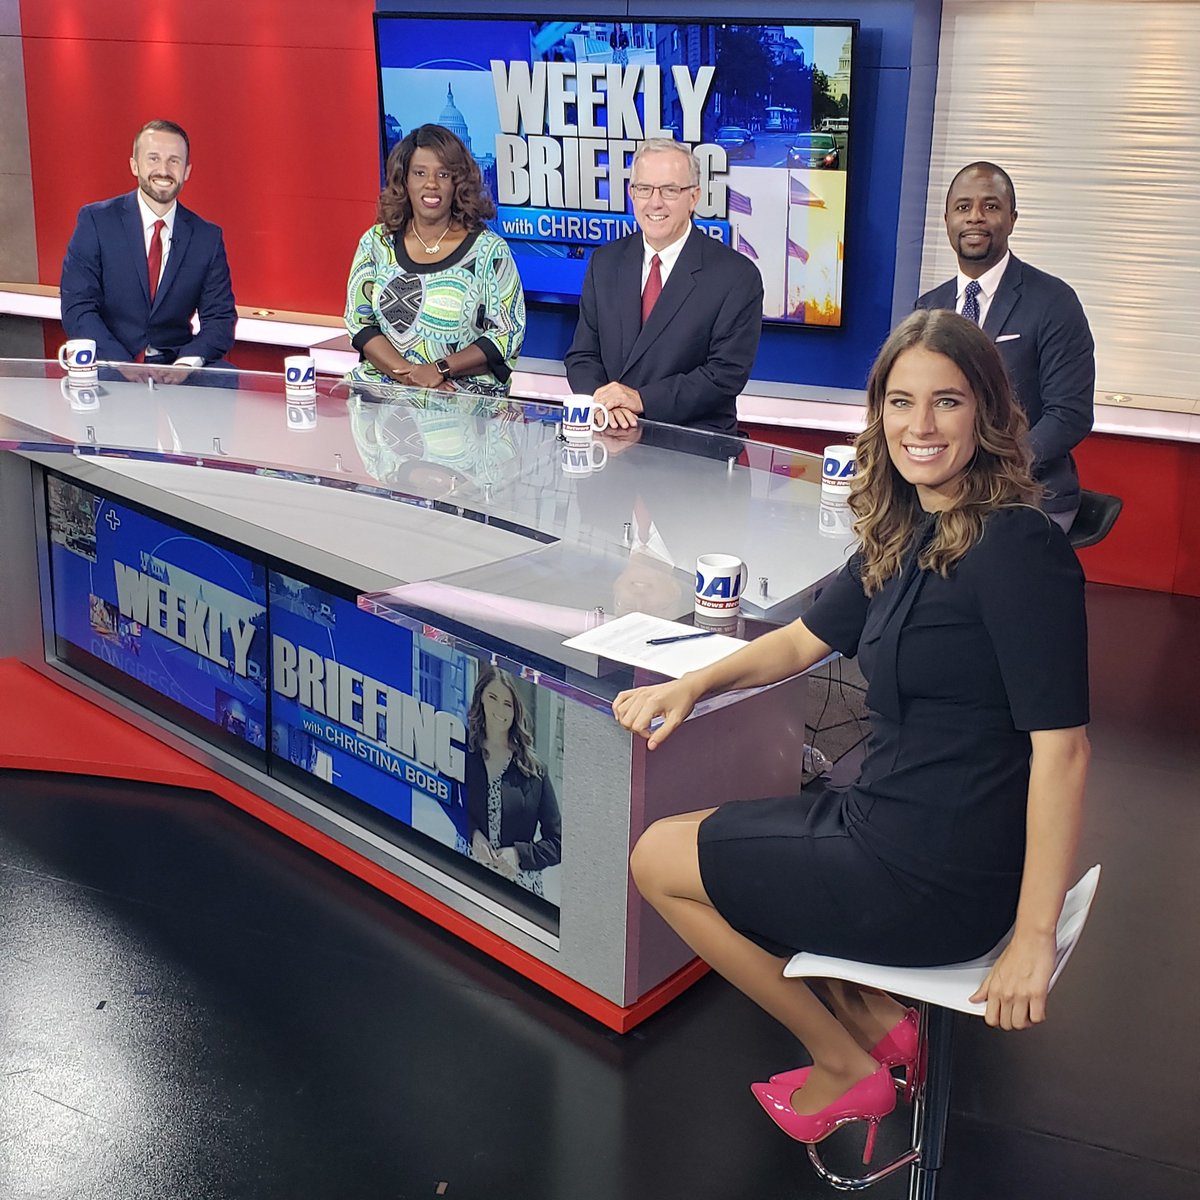 I am joining the panel discussion on  #weeklybriefing with @christina_bobb, airing today 2pm EST on @OANN.  Had a great time discussing current events with @MelikAbdul_, @ebonyjewess, and Chris Farrell.